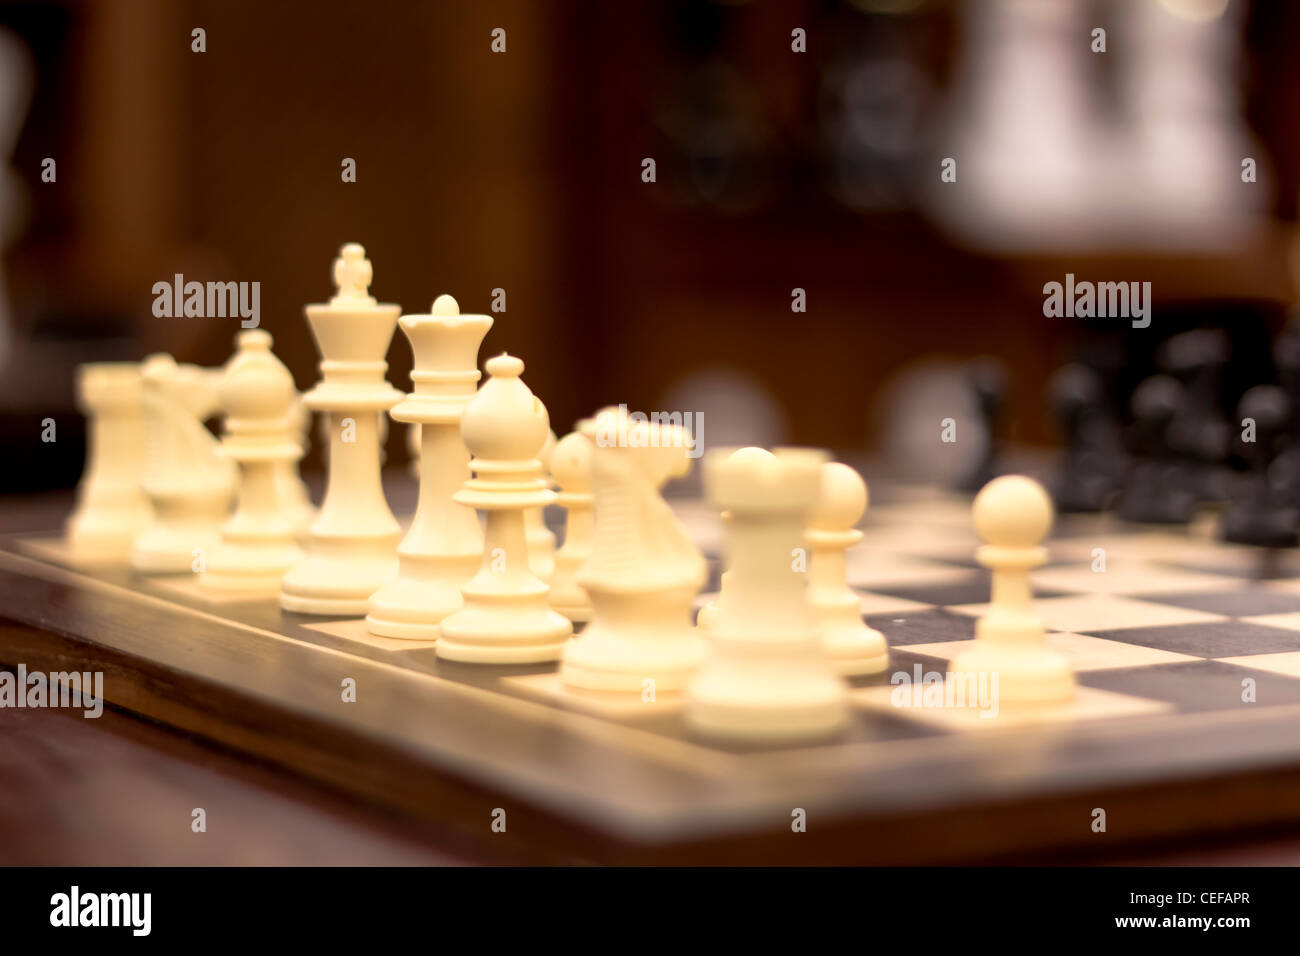 Image of a chess board, with focus on the king and queen of the white pieces. Stock Photo